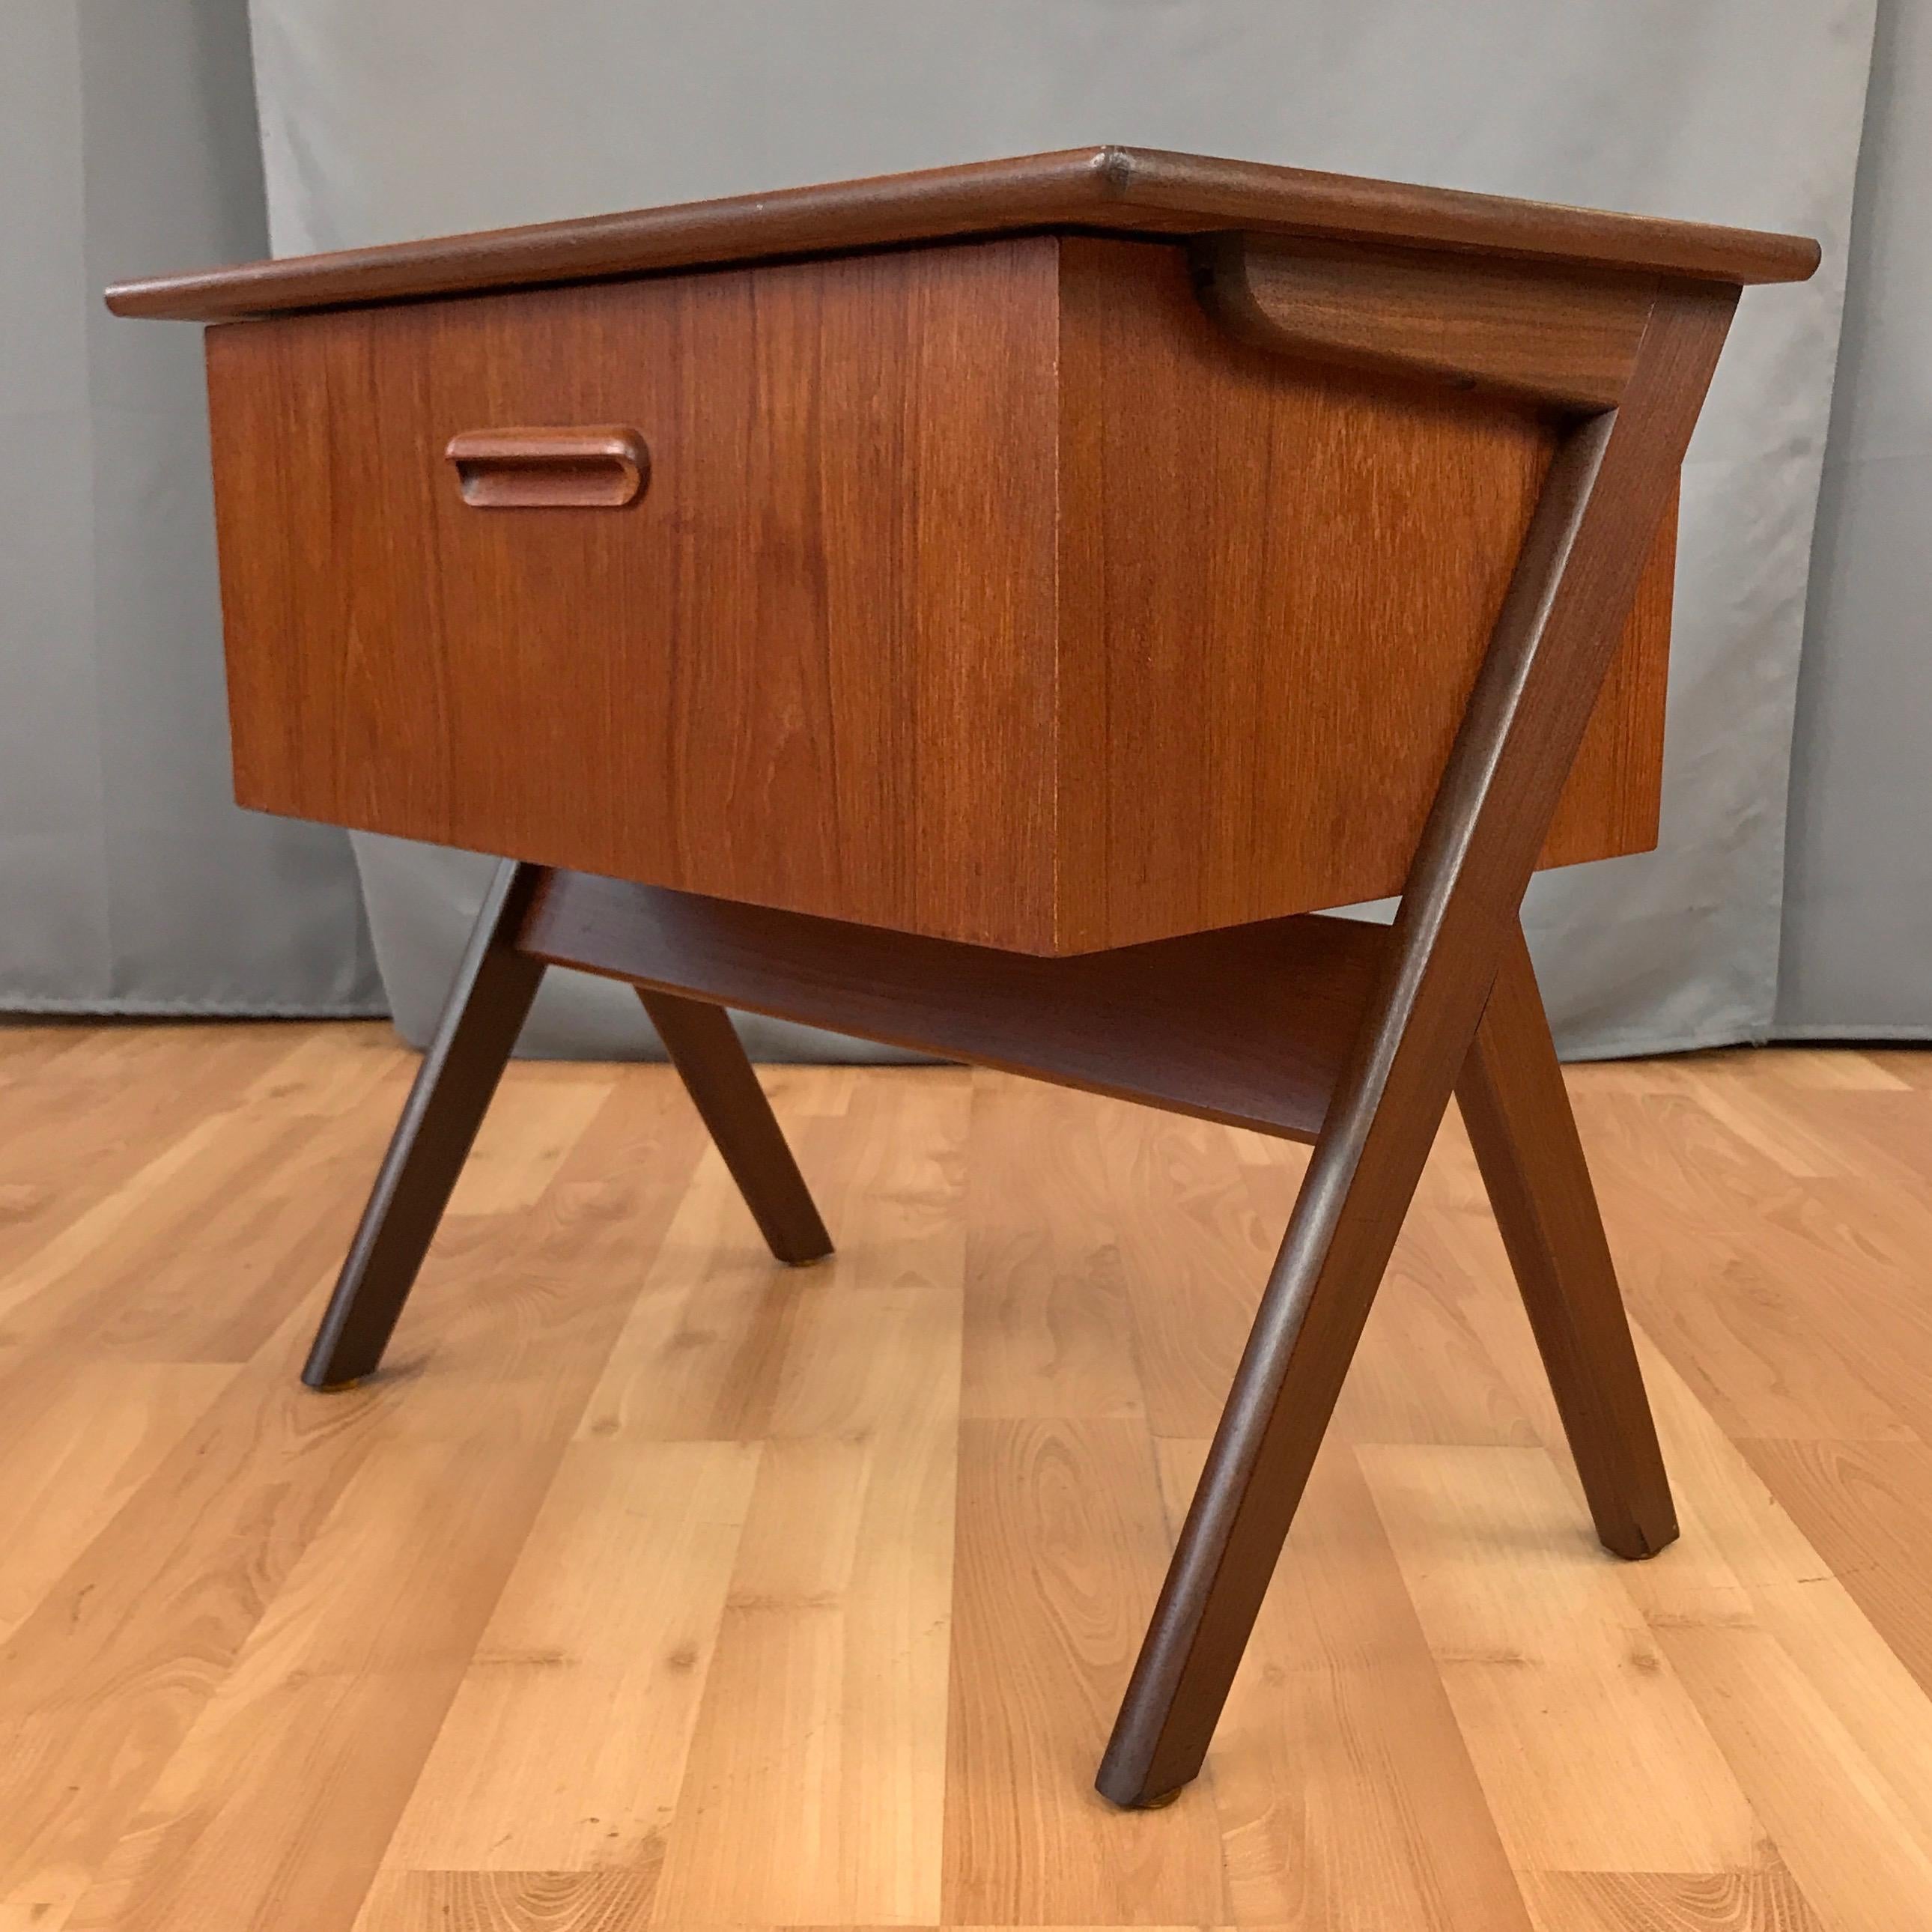 An uncommon 1960s Danish modern V-legged teak sewing box table that could also serve as a compact dry bar or versatile side table. 

Cantilevered top with deep, oversized drawer that pulls out and drops down to reveal a sliding multi-compartment